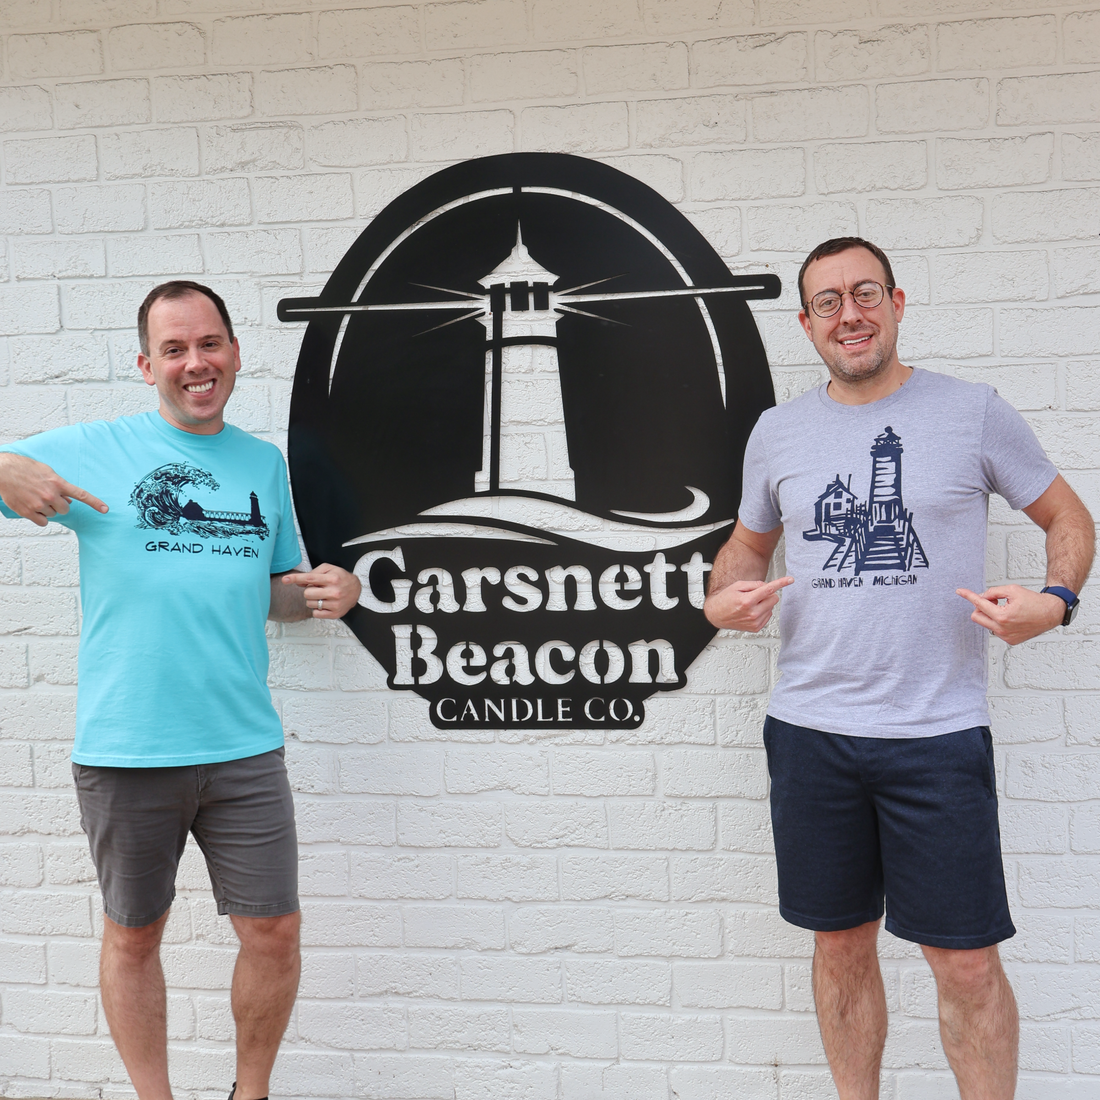 Garsnett Beacon Candle Co. is opening a new location in Grand Haven.